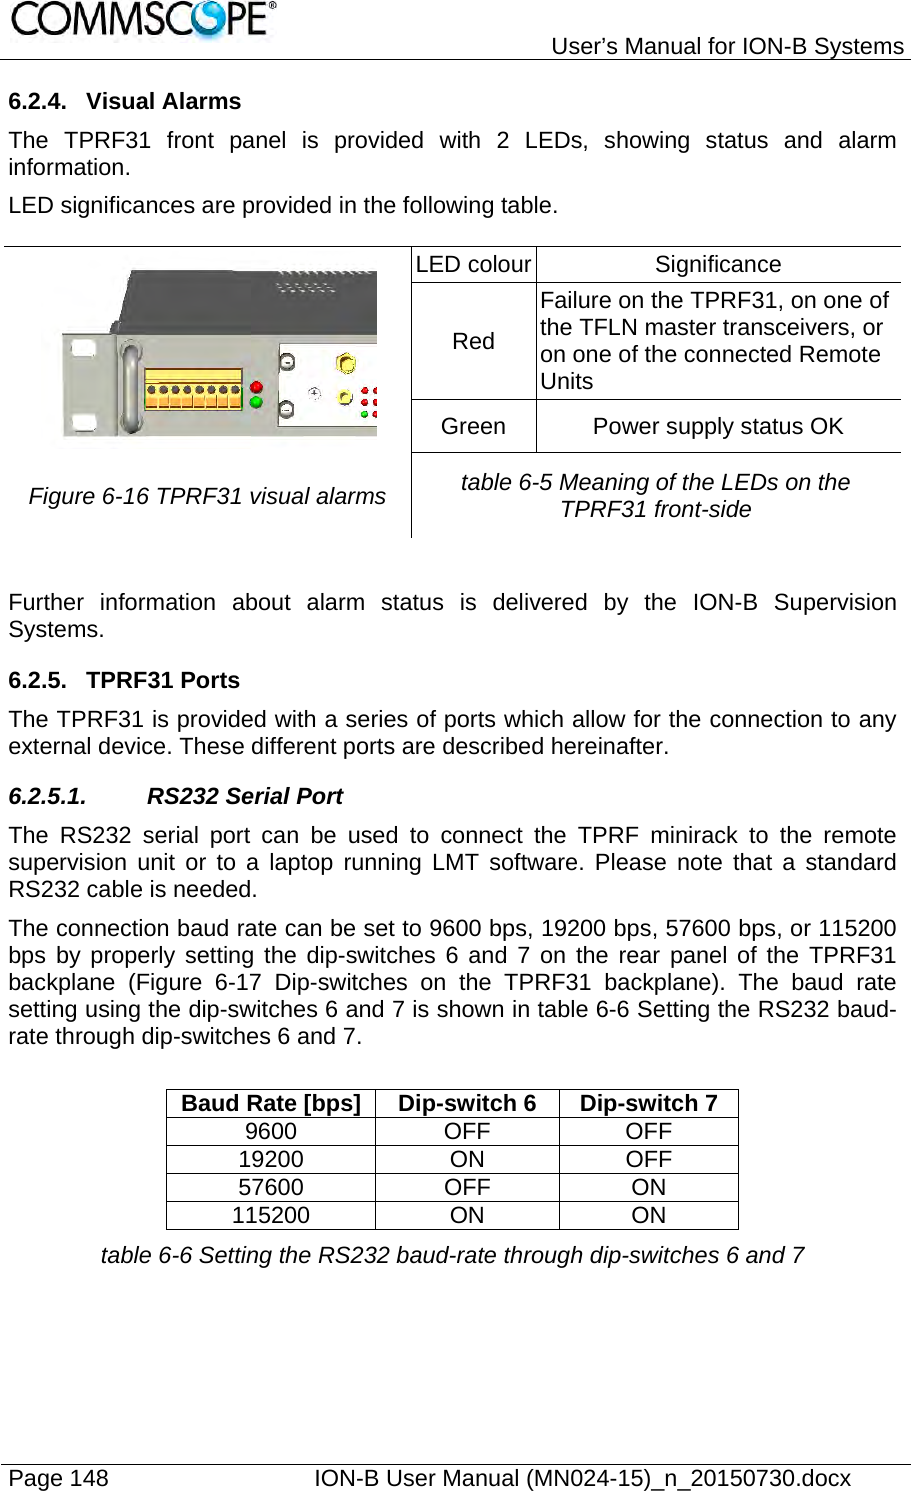   User’s Manual for ION-B Systems Page 148    ION-B User Manual (MN024-15)_n_20150730.docx  6.2.4. Visual Alarms The TPRF31 front panel is provided with 2 LEDs, showing status and alarm information. LED significances are provided in the following table.  LED colour Significance Red Failure on the TPRF31, on one of the TFLN master transceivers, or on one of the connected Remote Units Green  Power supply status OK Figure 6-16 TPRF31 visual alarms  table 6-5 Meaning of the LEDs on the TPRF31 front-side  Further information about alarm status is delivered by the ION-B Supervision Systems. 6.2.5. TPRF31 Ports The TPRF31 is provided with a series of ports which allow for the connection to any external device. These different ports are described hereinafter. 6.2.5.1. RS232 Serial Port The RS232 serial port can be used to connect the TPRF minirack to the remote supervision unit or to a laptop running LMT software. Please note that a standard RS232 cable is needed. The connection baud rate can be set to 9600 bps, 19200 bps, 57600 bps, or 115200 bps by properly setting the dip-switches 6 and 7 on the rear panel of the TPRF31 backplane (Figure 6-17 Dip-switches on the TPRF31 backplane). The baud rate setting using the dip-switches 6 and 7 is shown in table 6-6 Setting the RS232 baud-rate through dip-switches 6 and 7.  Baud Rate [bps]  Dip-switch 6  Dip-switch 7 9600 OFF OFF19200 ON OFF 57600 OFF ON 115200 ON  ON table 6-6 Setting the RS232 baud-rate through dip-switches 6 and 7   